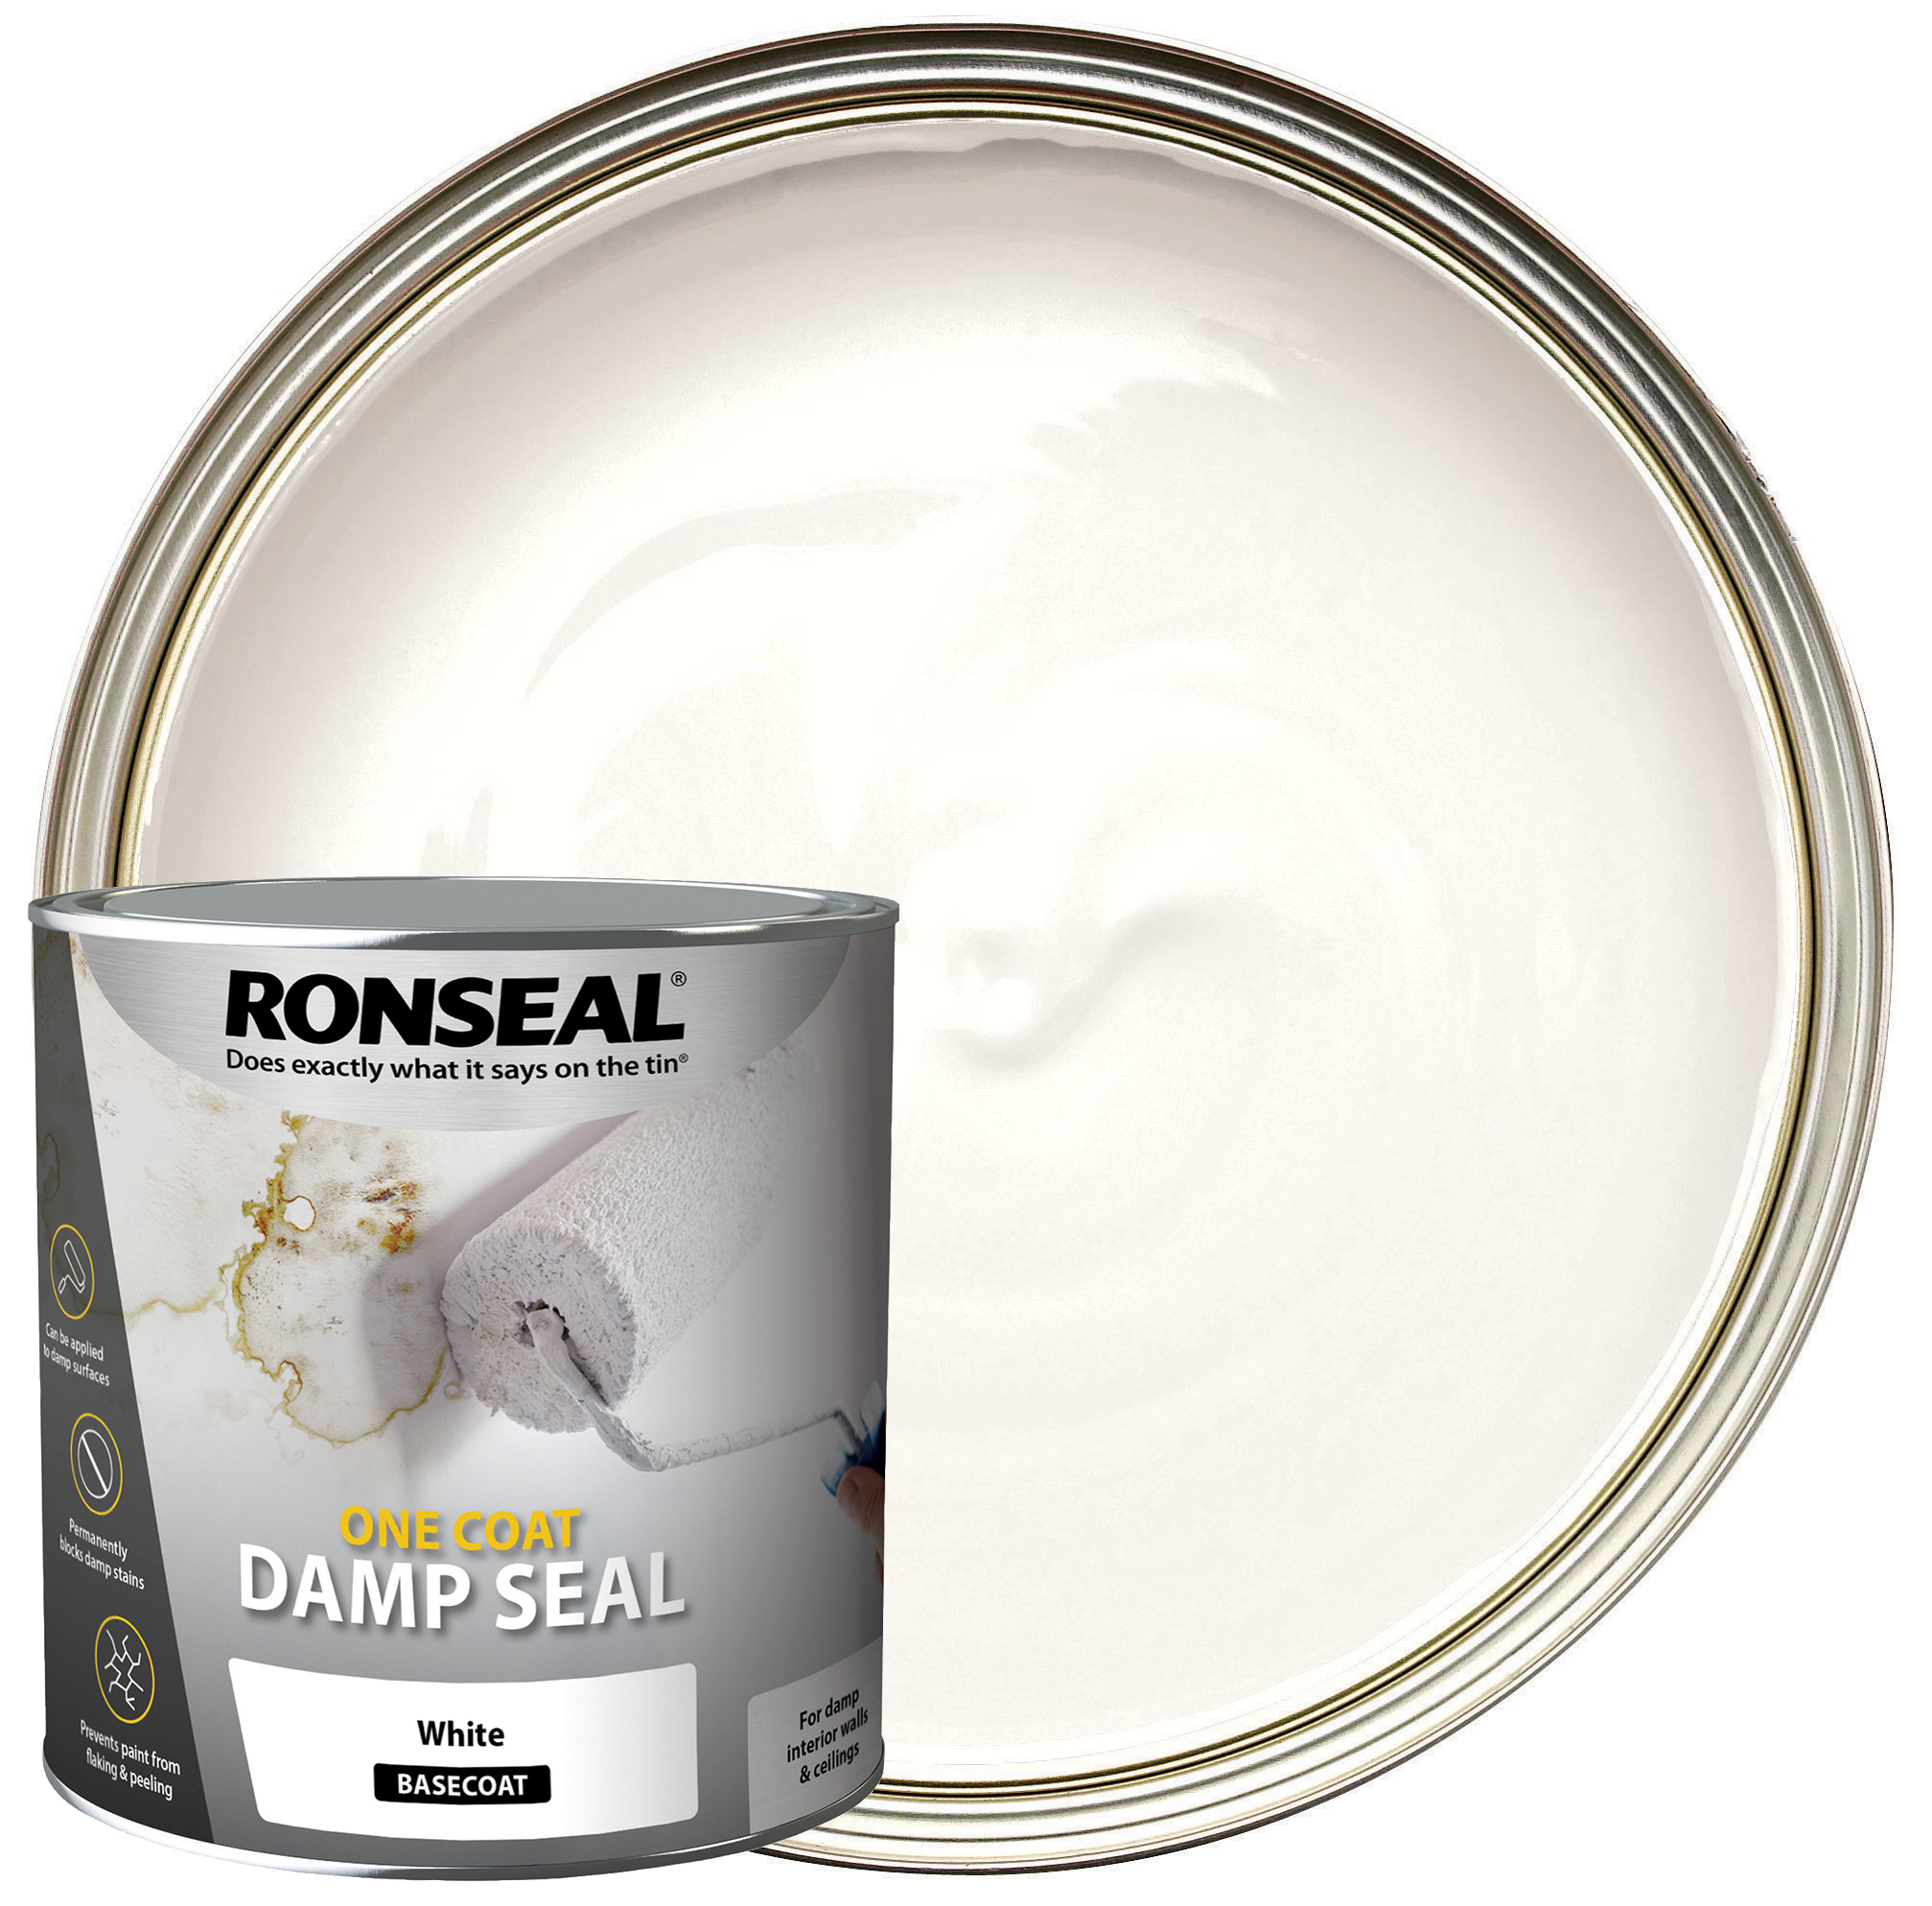 Image of Ronseal One Coat Damp Seal Basecoat Paint - White 2.5l